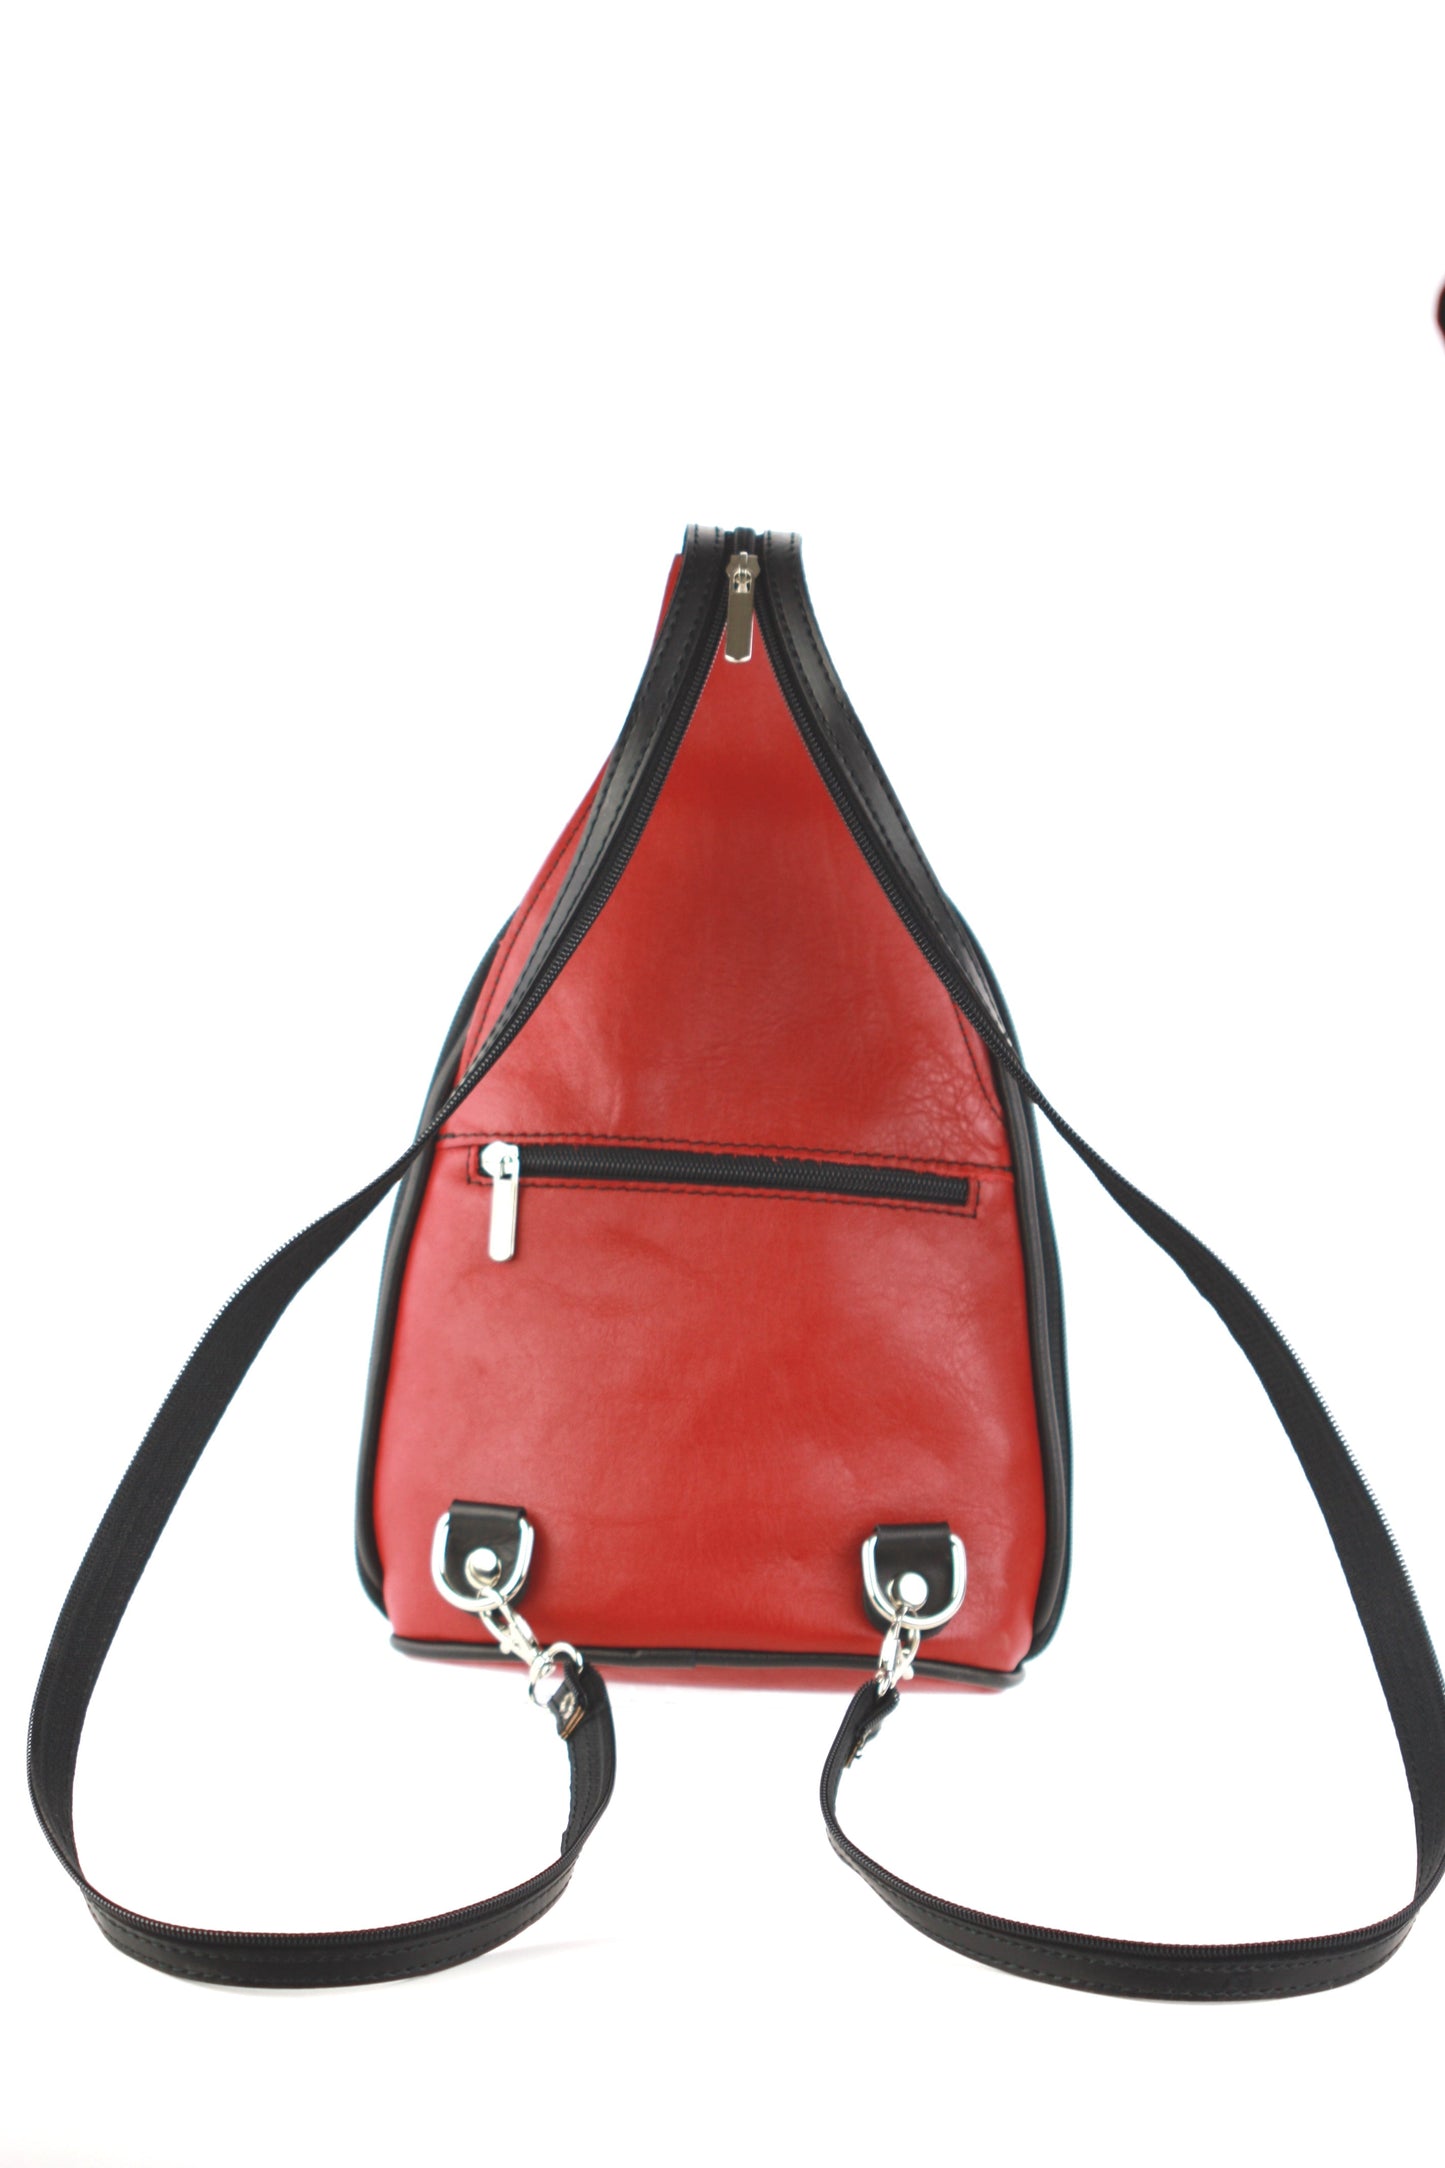 Foglia backpack in red with black contrast